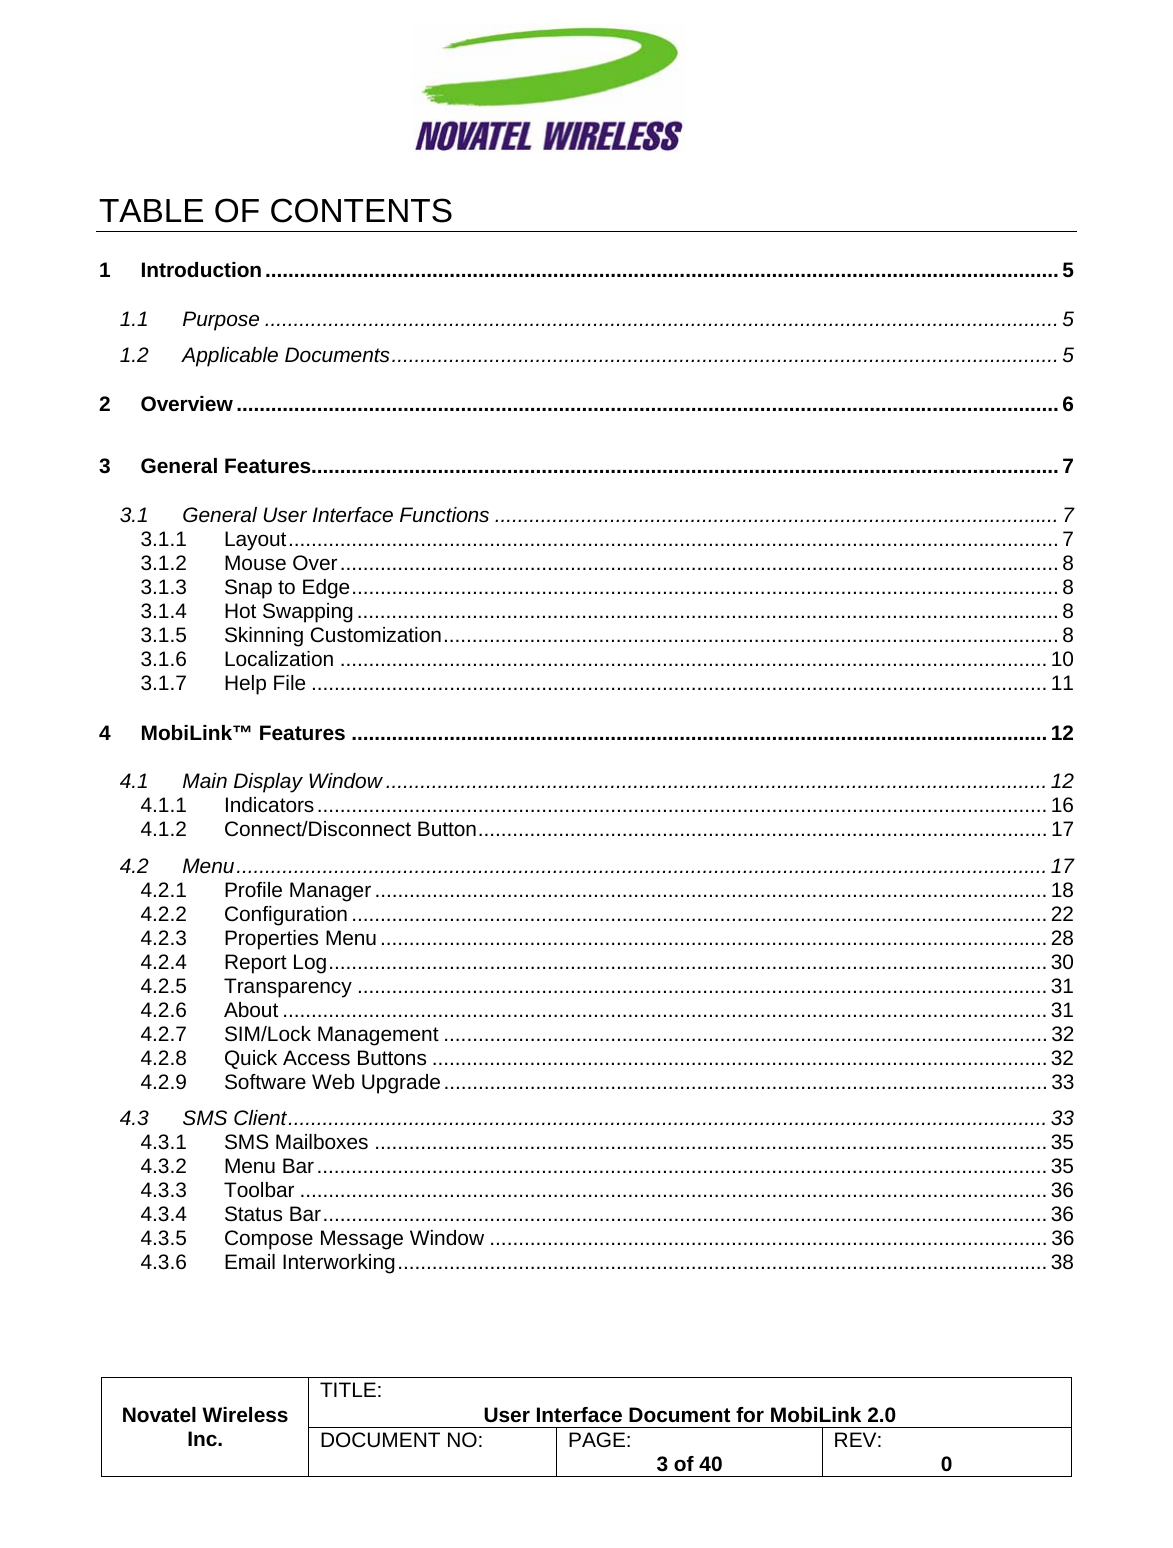                                                         TITLE:  User Interface Document for MobiLink 2.0 Novatel Wireless  Inc. DOCUMENT NO:  PAGE:   3 of 40  REV:  0   TABLE OF CONTENTS 1 Introduction.......................................................................................................................................... 5 1.1 Purpose .......................................................................................................................................... 5 1.2 Applicable Documents.................................................................................................................... 5 2 Overview ............................................................................................................................................... 6 3 General Features.................................................................................................................................. 7 3.1 General User Interface Functions .................................................................................................. 7 3.1.1 Layout...................................................................................................................................... 7 3.1.2 Mouse Over............................................................................................................................. 8 3.1.3 Snap to Edge........................................................................................................................... 8 3.1.4 Hot Swapping .......................................................................................................................... 8 3.1.5 Skinning Customization........................................................................................................... 8 3.1.6 Localization ........................................................................................................................... 10 3.1.7 Help File ................................................................................................................................ 11 4 MobiLink™ Features ......................................................................................................................... 12 4.1 Main Display Window ................................................................................................................... 12 4.1.1 Indicators............................................................................................................................... 16 4.1.2 Connect/Disconnect Button................................................................................................... 17 4.2 Menu............................................................................................................................................. 17 4.2.1 Profile Manager ..................................................................................................................... 18 4.2.2 Configuration ......................................................................................................................... 22 4.2.3 Properties Menu .................................................................................................................... 28 4.2.4 Report Log............................................................................................................................. 30 4.2.5 Transparency ........................................................................................................................ 31 4.2.6 About ..................................................................................................................................... 31 4.2.7 SIM/Lock Management ......................................................................................................... 32 4.2.8 Quick Access Buttons ...........................................................................................................32 4.2.9 Software Web Upgrade......................................................................................................... 33 4.3 SMS Client.................................................................................................................................... 33 4.3.1 SMS Mailboxes ..................................................................................................................... 35 4.3.2 Menu Bar............................................................................................................................... 35 4.3.3 Toolbar .................................................................................................................................. 36 4.3.4 Status Bar.............................................................................................................................. 36 4.3.5 Compose Message Window ................................................................................................. 36 4.3.6 Email Interworking................................................................................................................. 38 